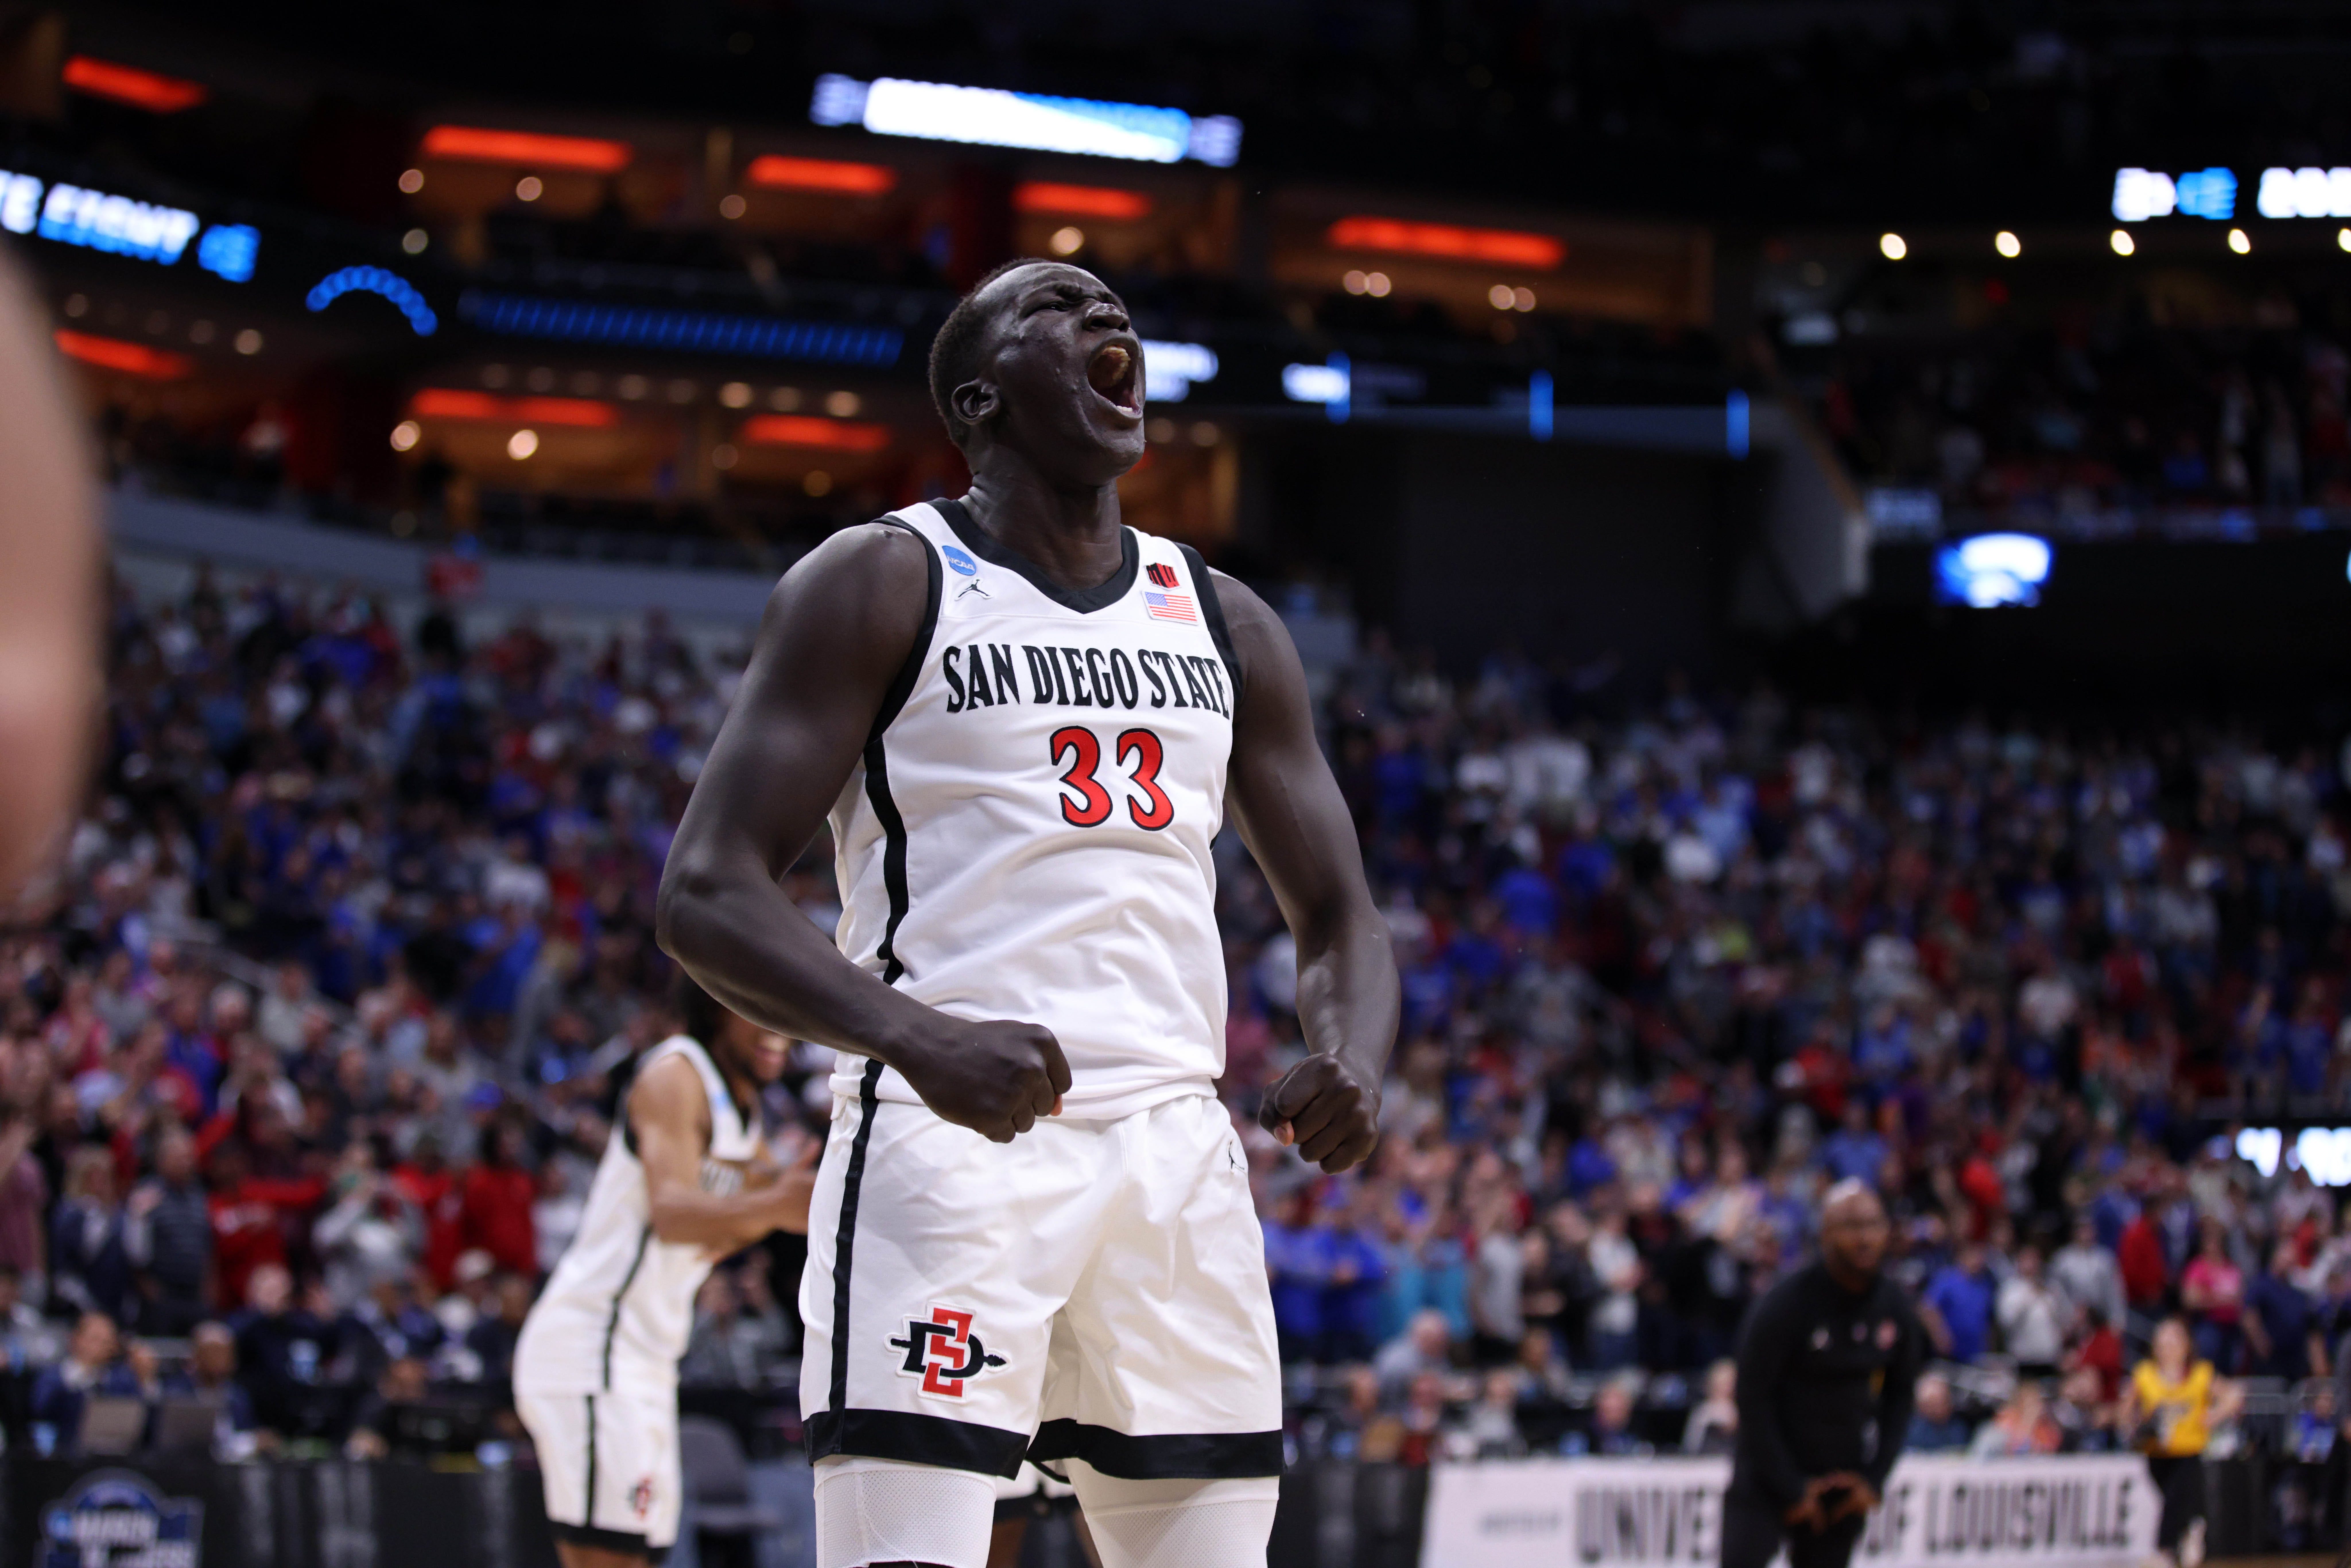 San Diego State, Miami adding to unique Final Four leads winners and losers from Sunday's Elite Eight